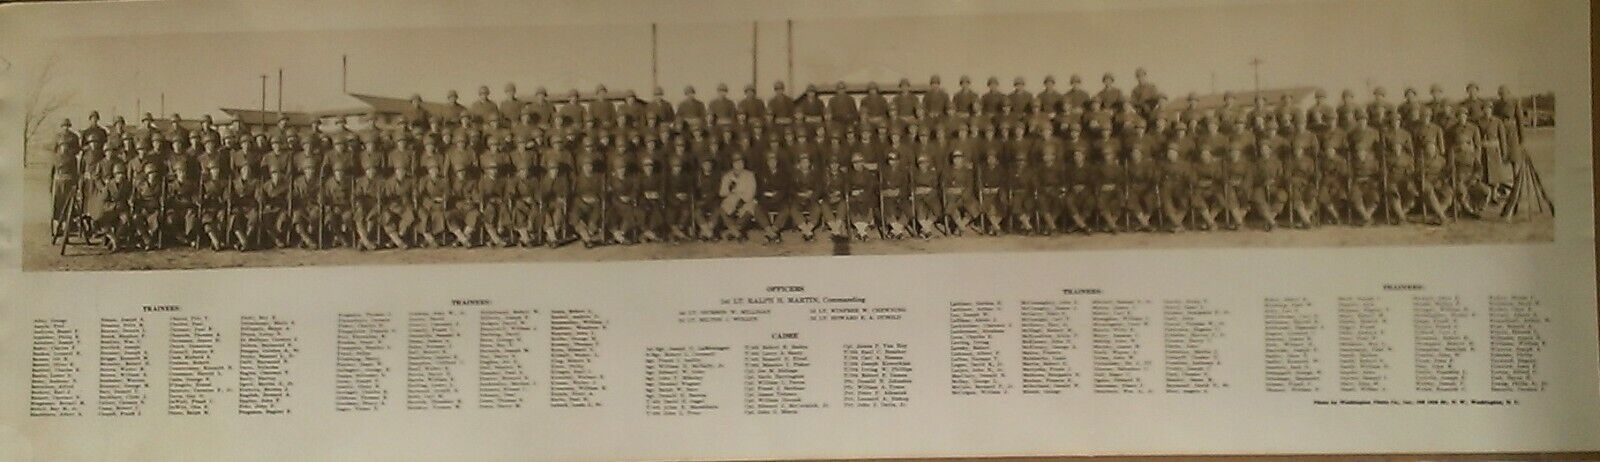 WWII Panoramic Photo - Unknown Regiment - ALL NAMES IN LISTING